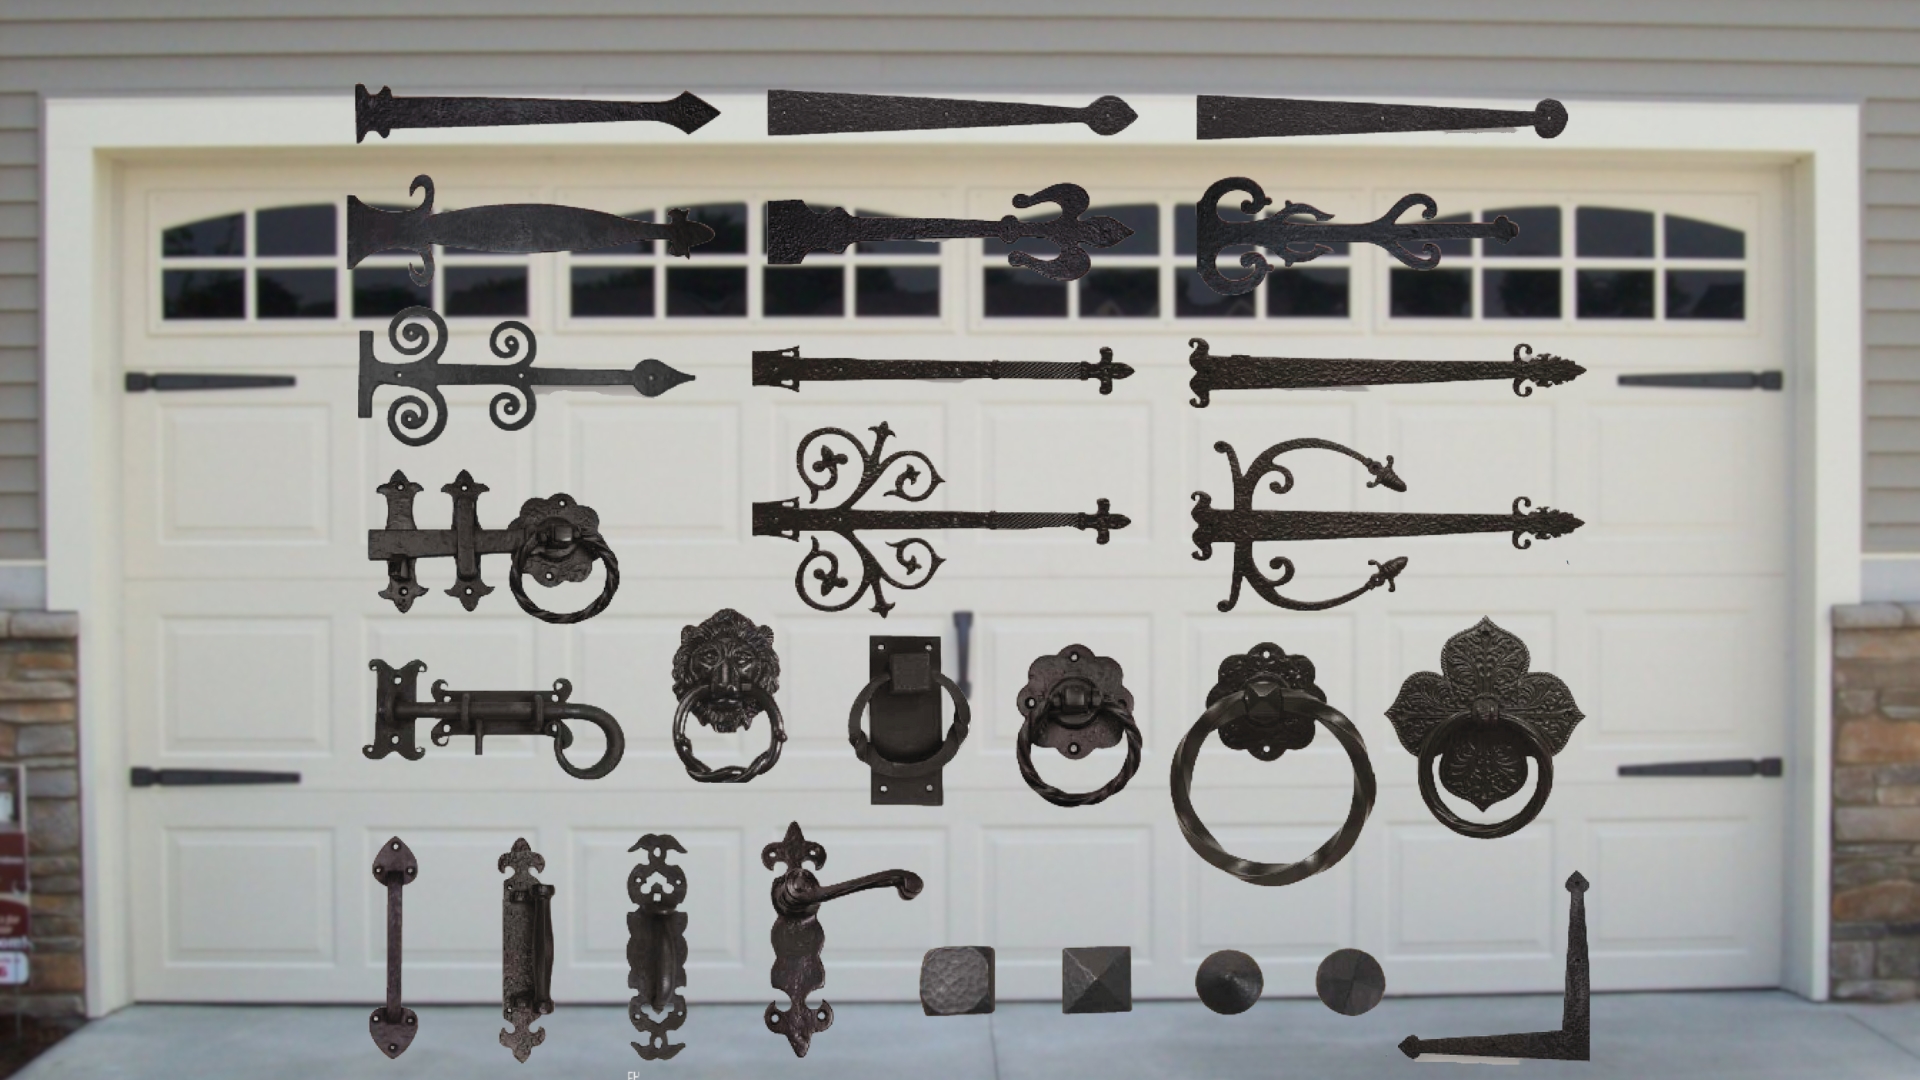 A selection of different garage door decorative hardware